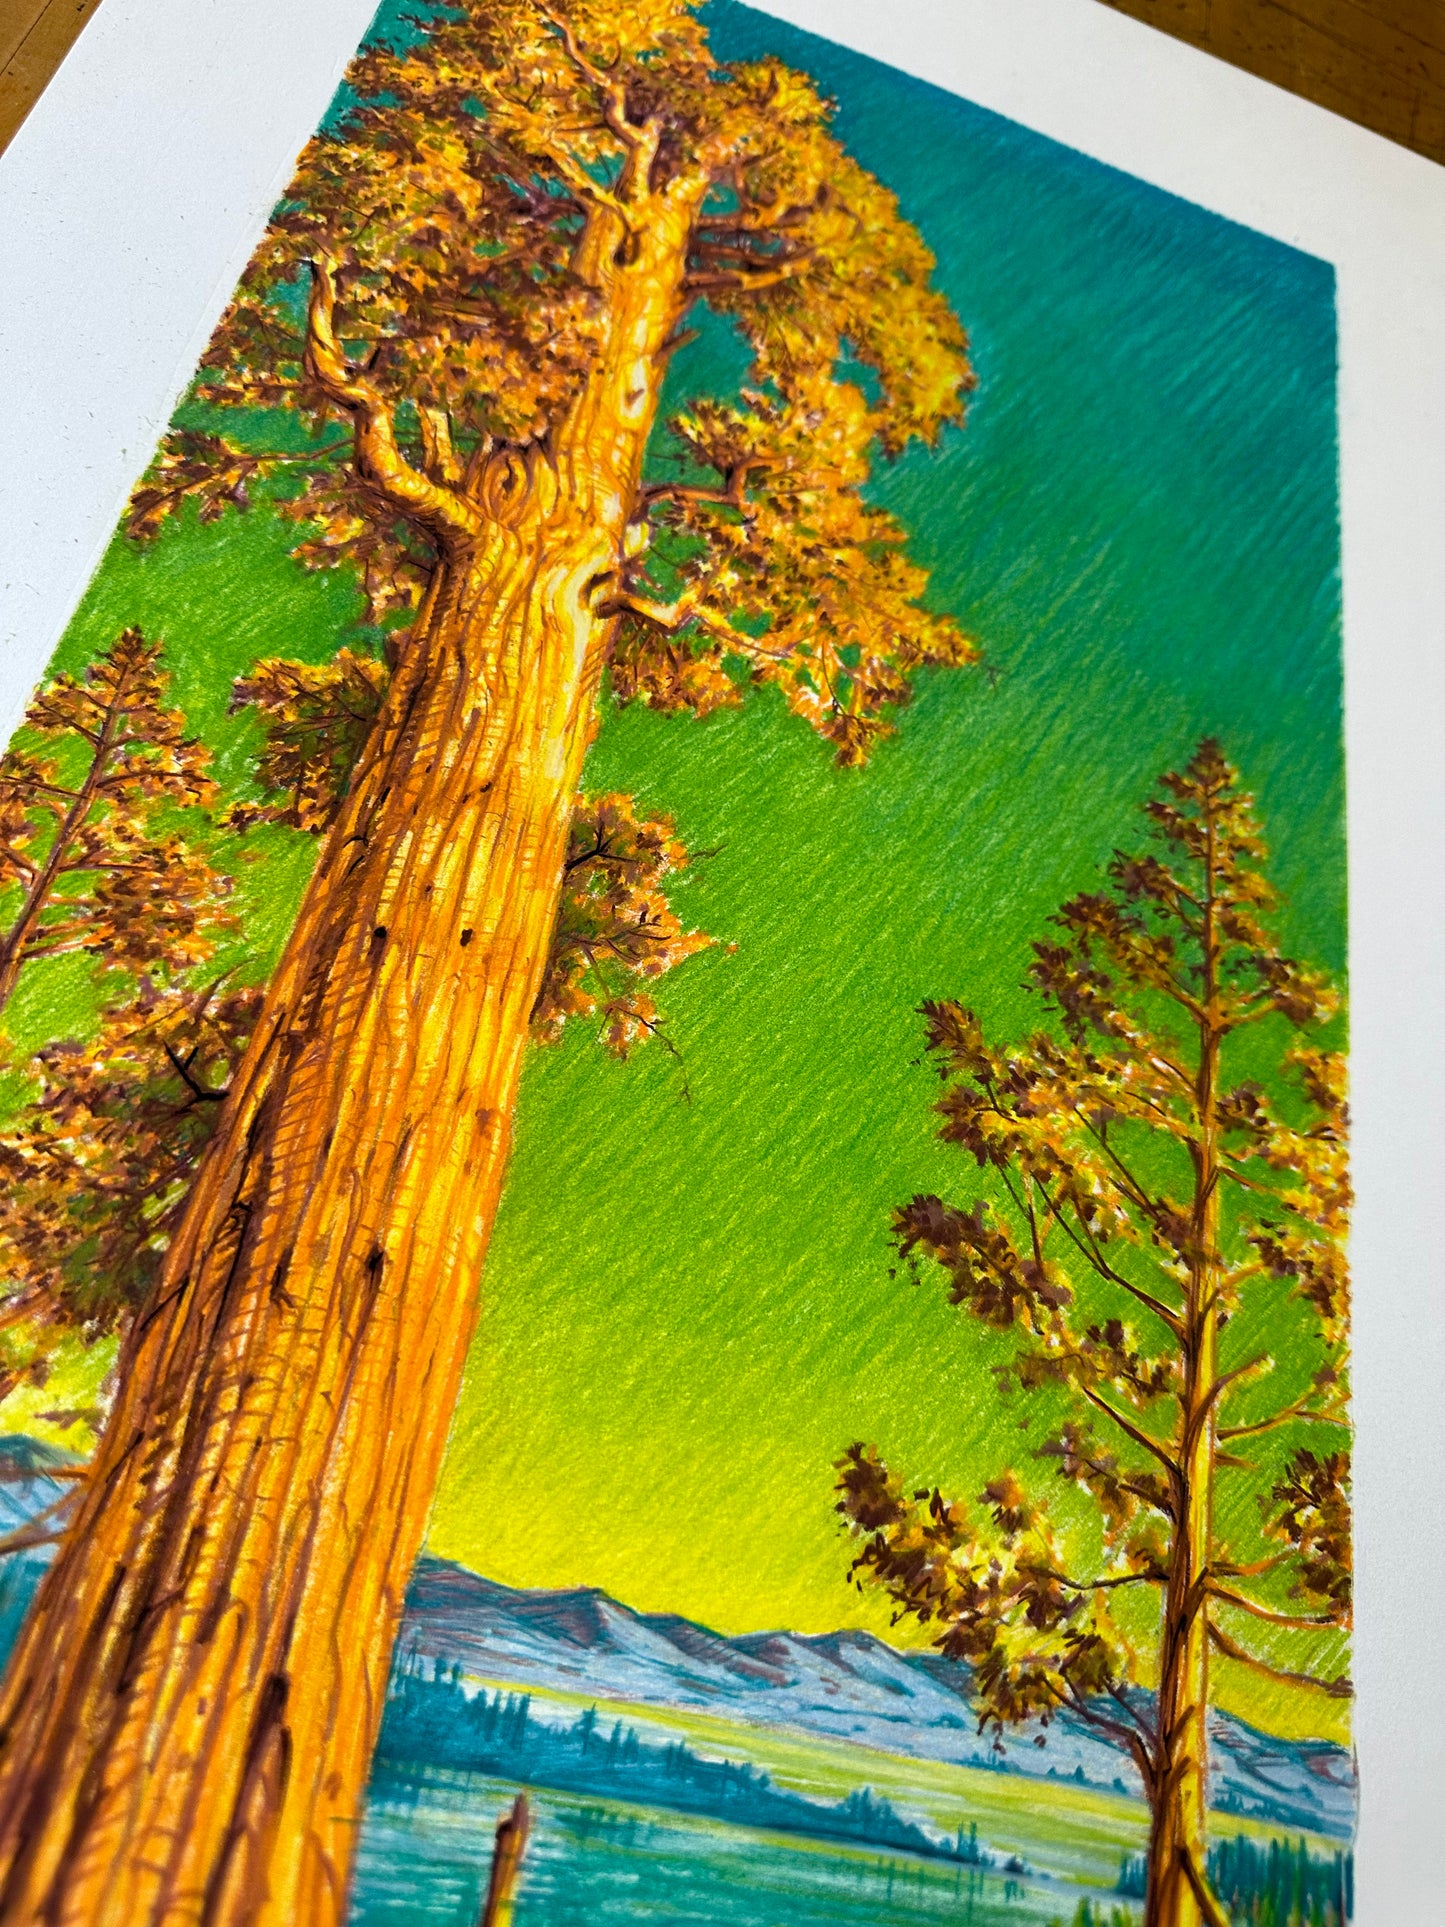 AJ Masthay "Sequoia" Color Drawing - OG